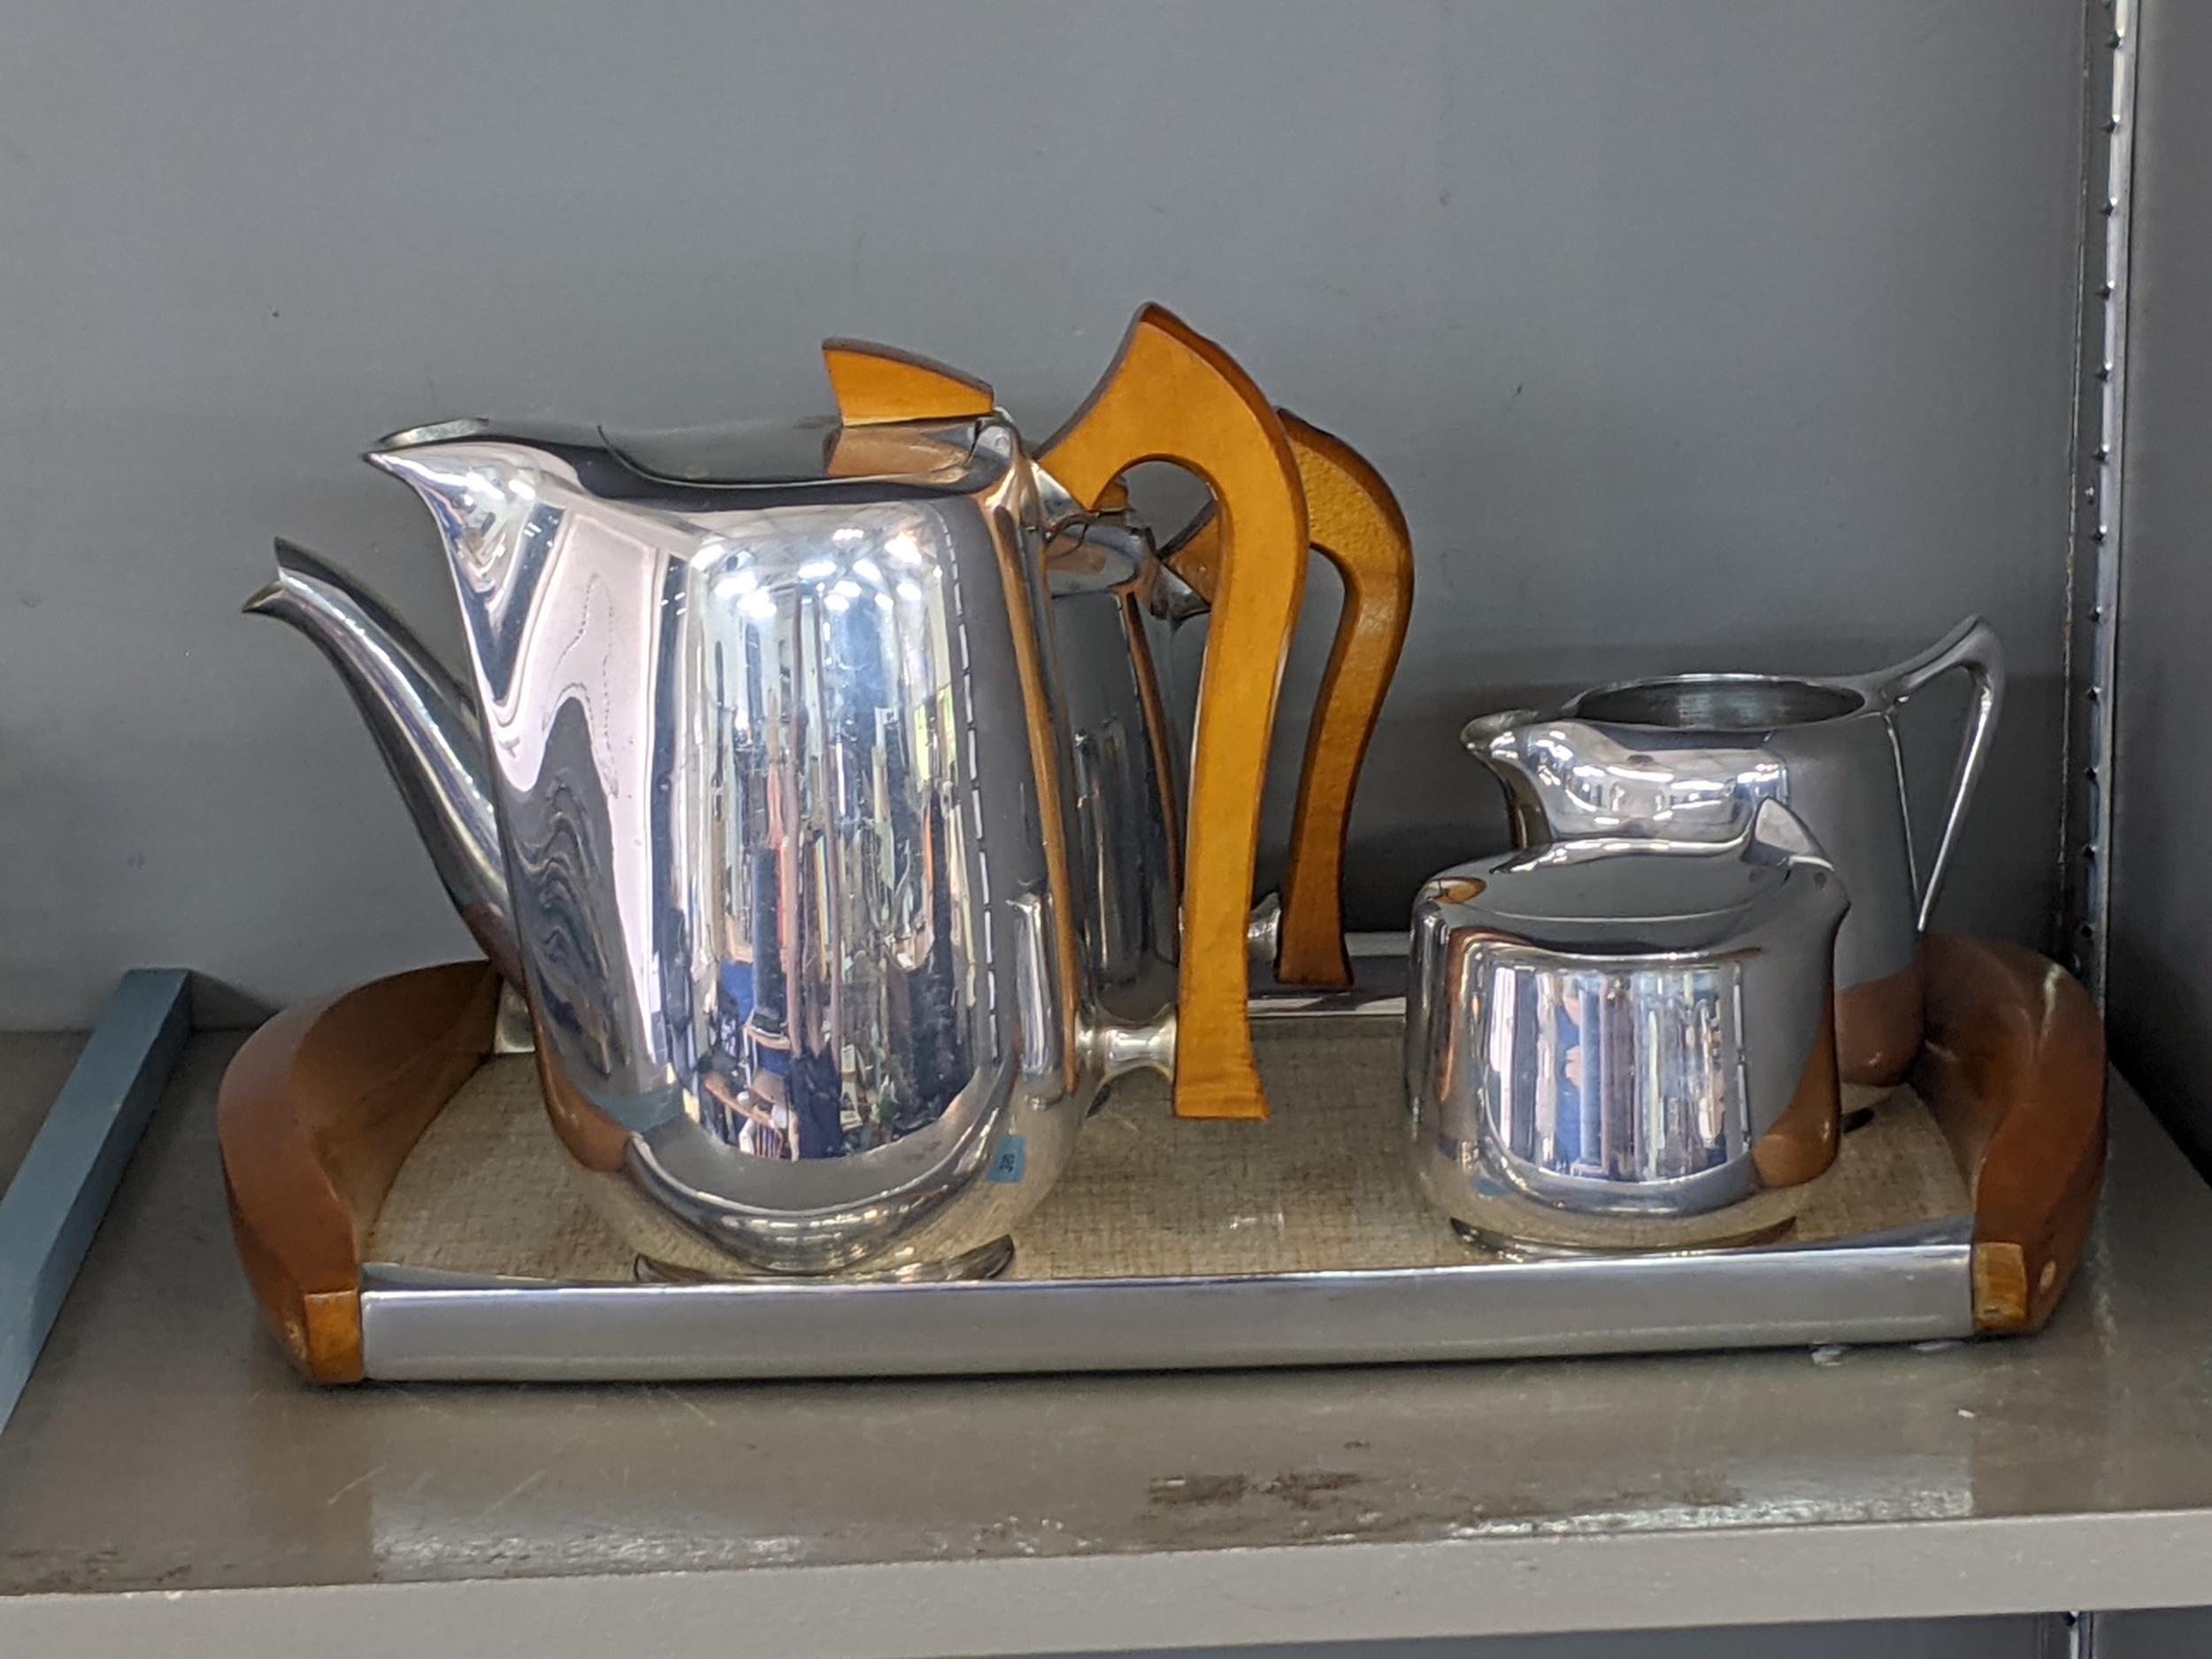 Picquot ware items to include a teapot, a coffee pot, a milk jug and a sugar bowl with a hinged